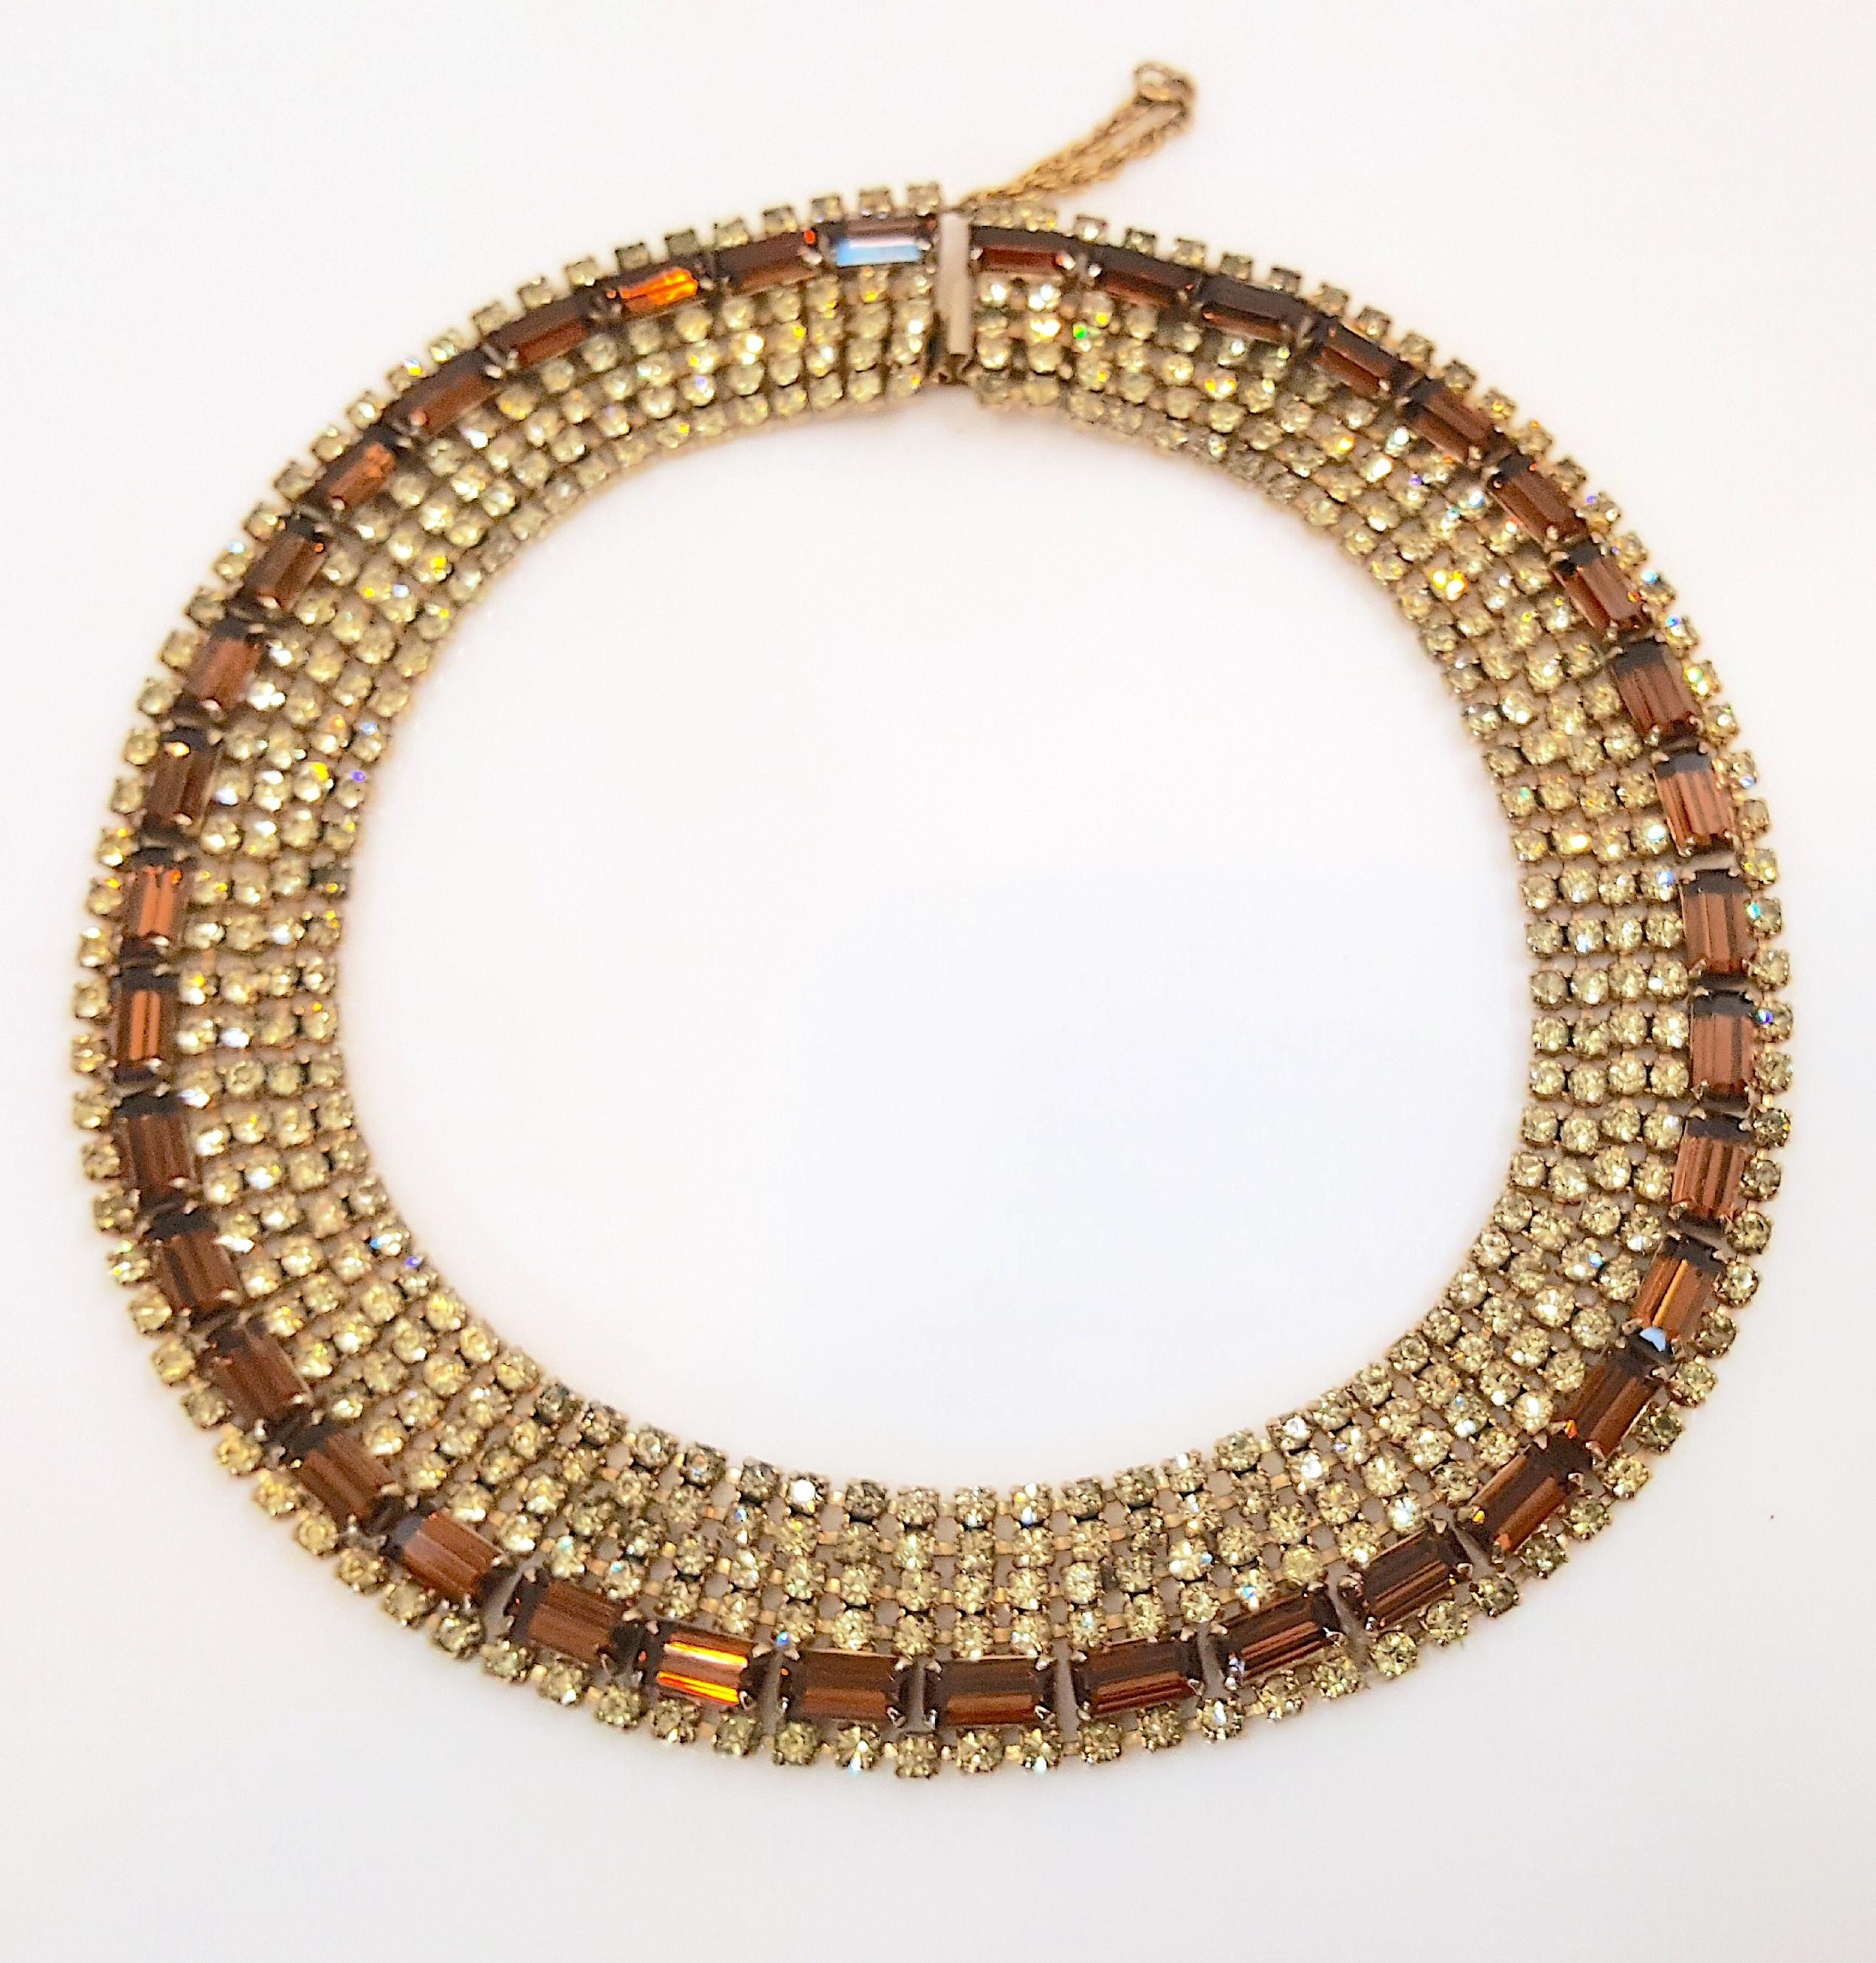 While making similar mid-century haute-couture costume-jewelry necklaces for Christian Dior, designer Max Muller who was based near Kaufbeuren, Western Germany, created this unsigned gold-tone choker collar featuring faux-diamond mixed-cut brown and